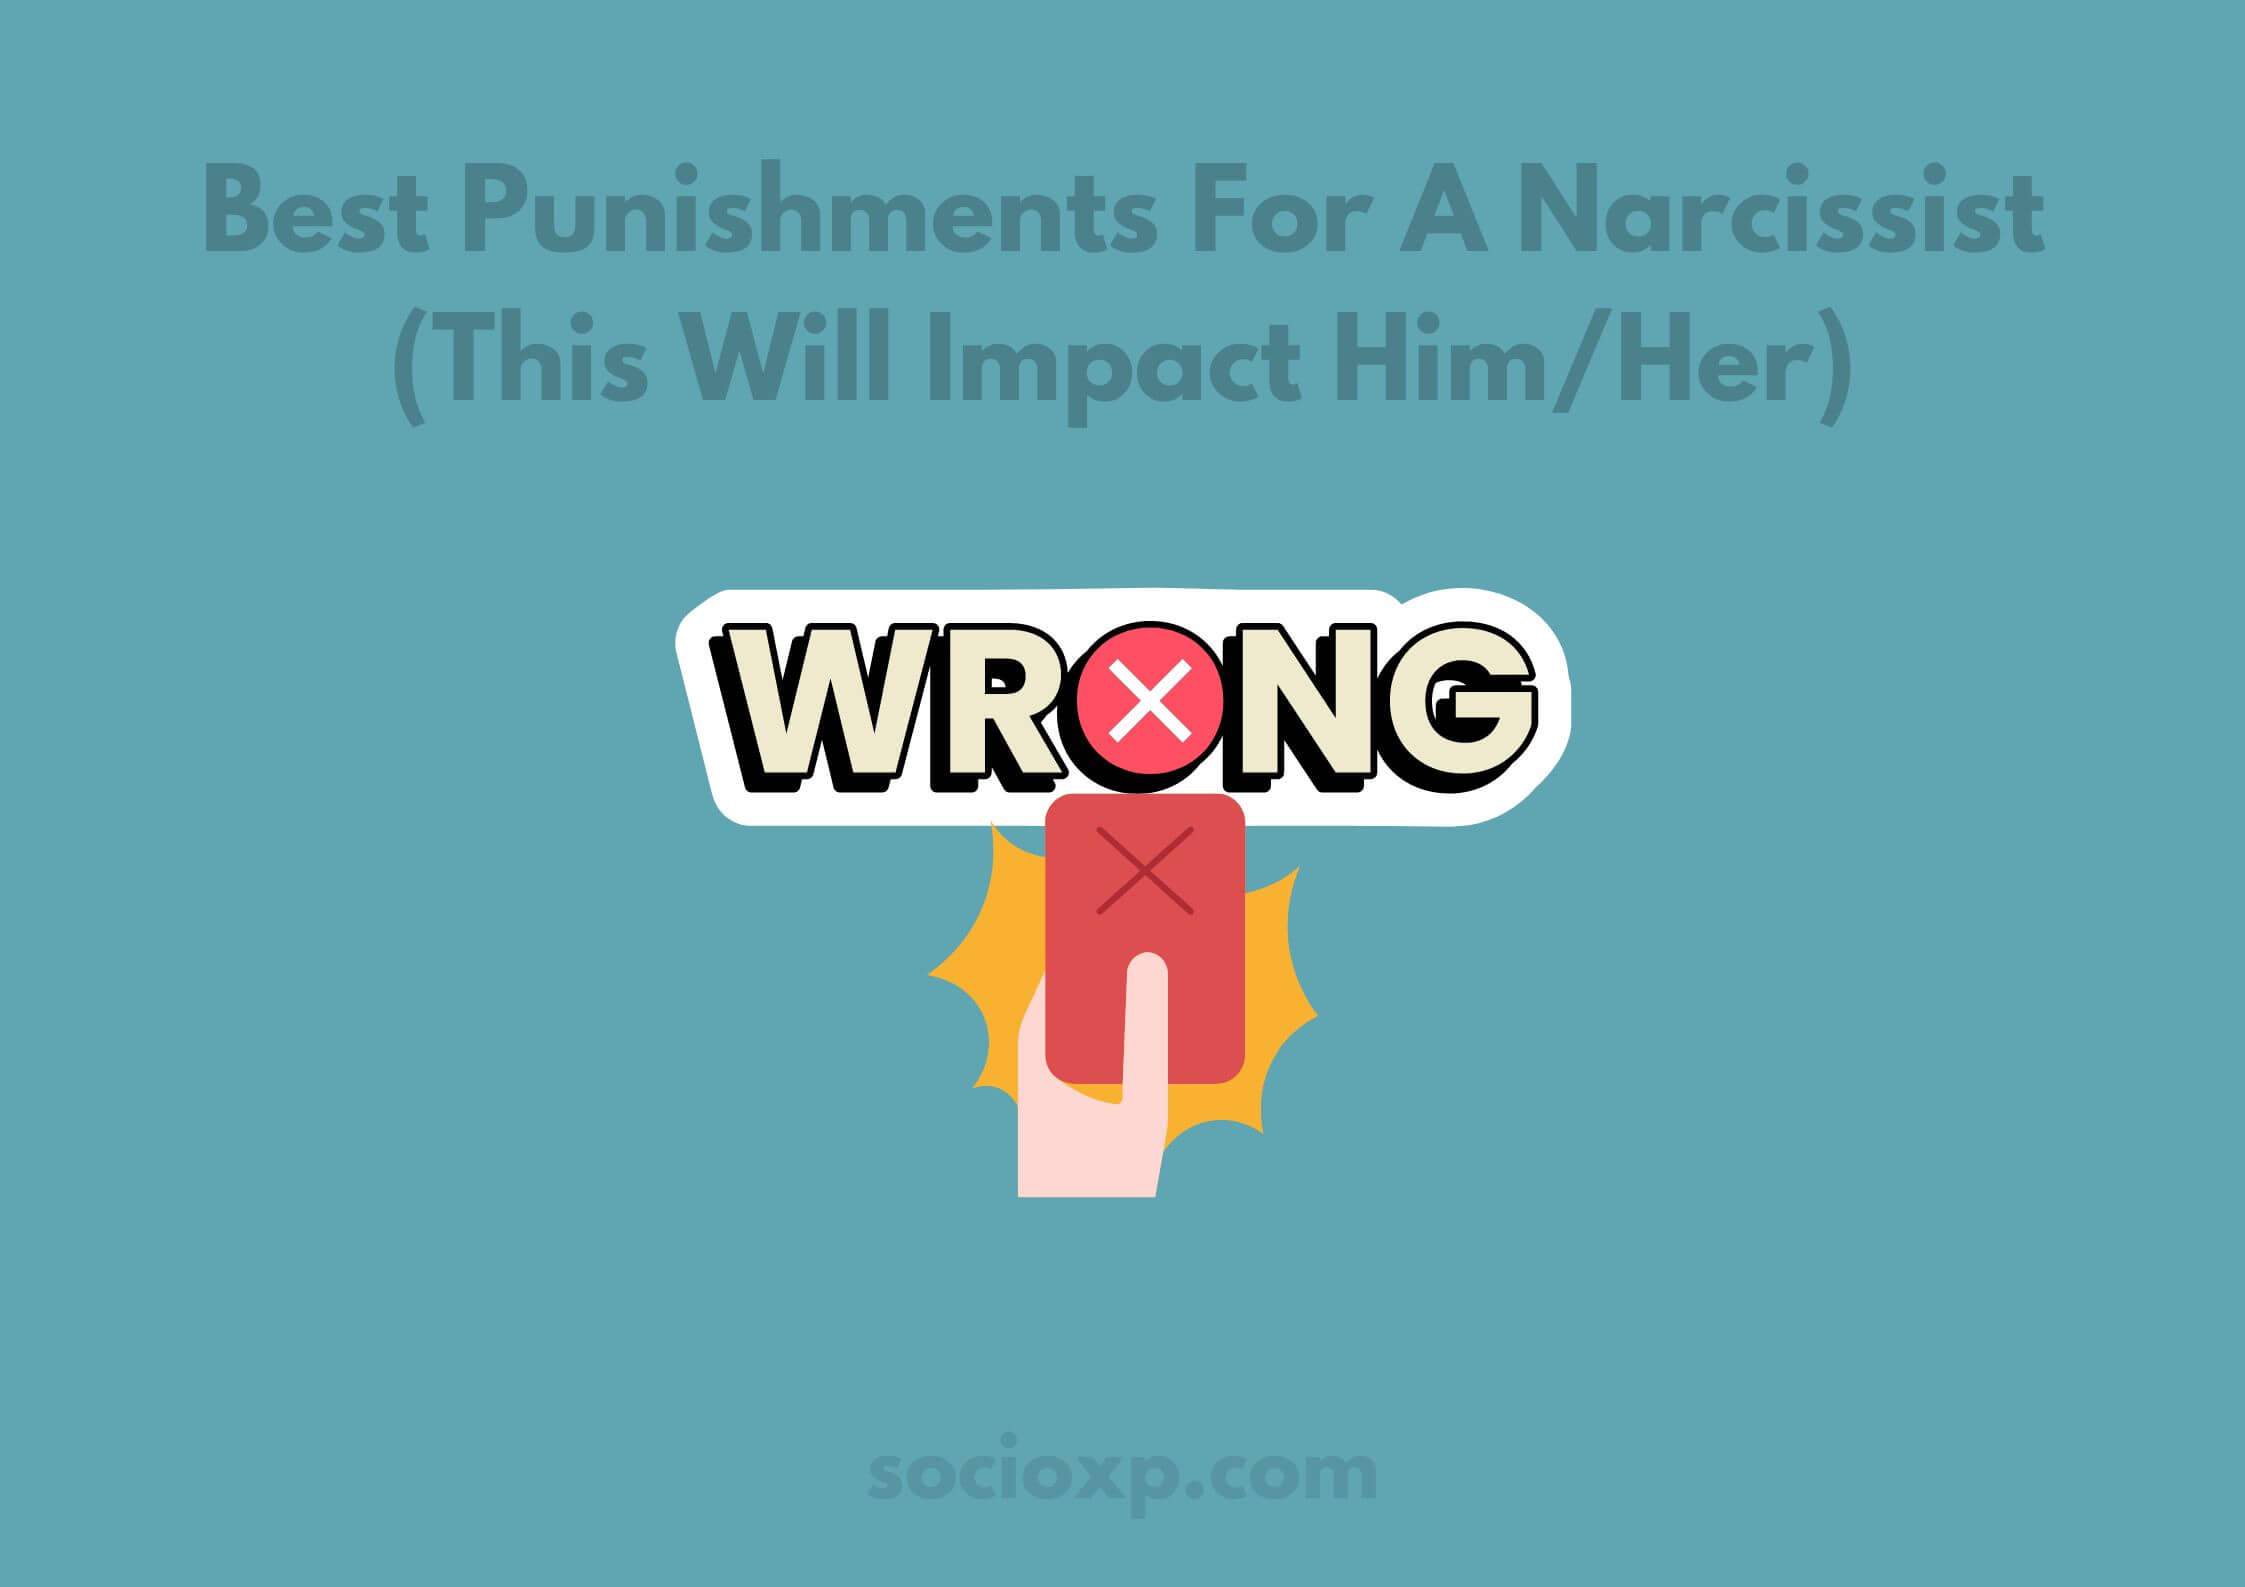 Best Punishments For A Narcissist (This Will Impact Him/Her)